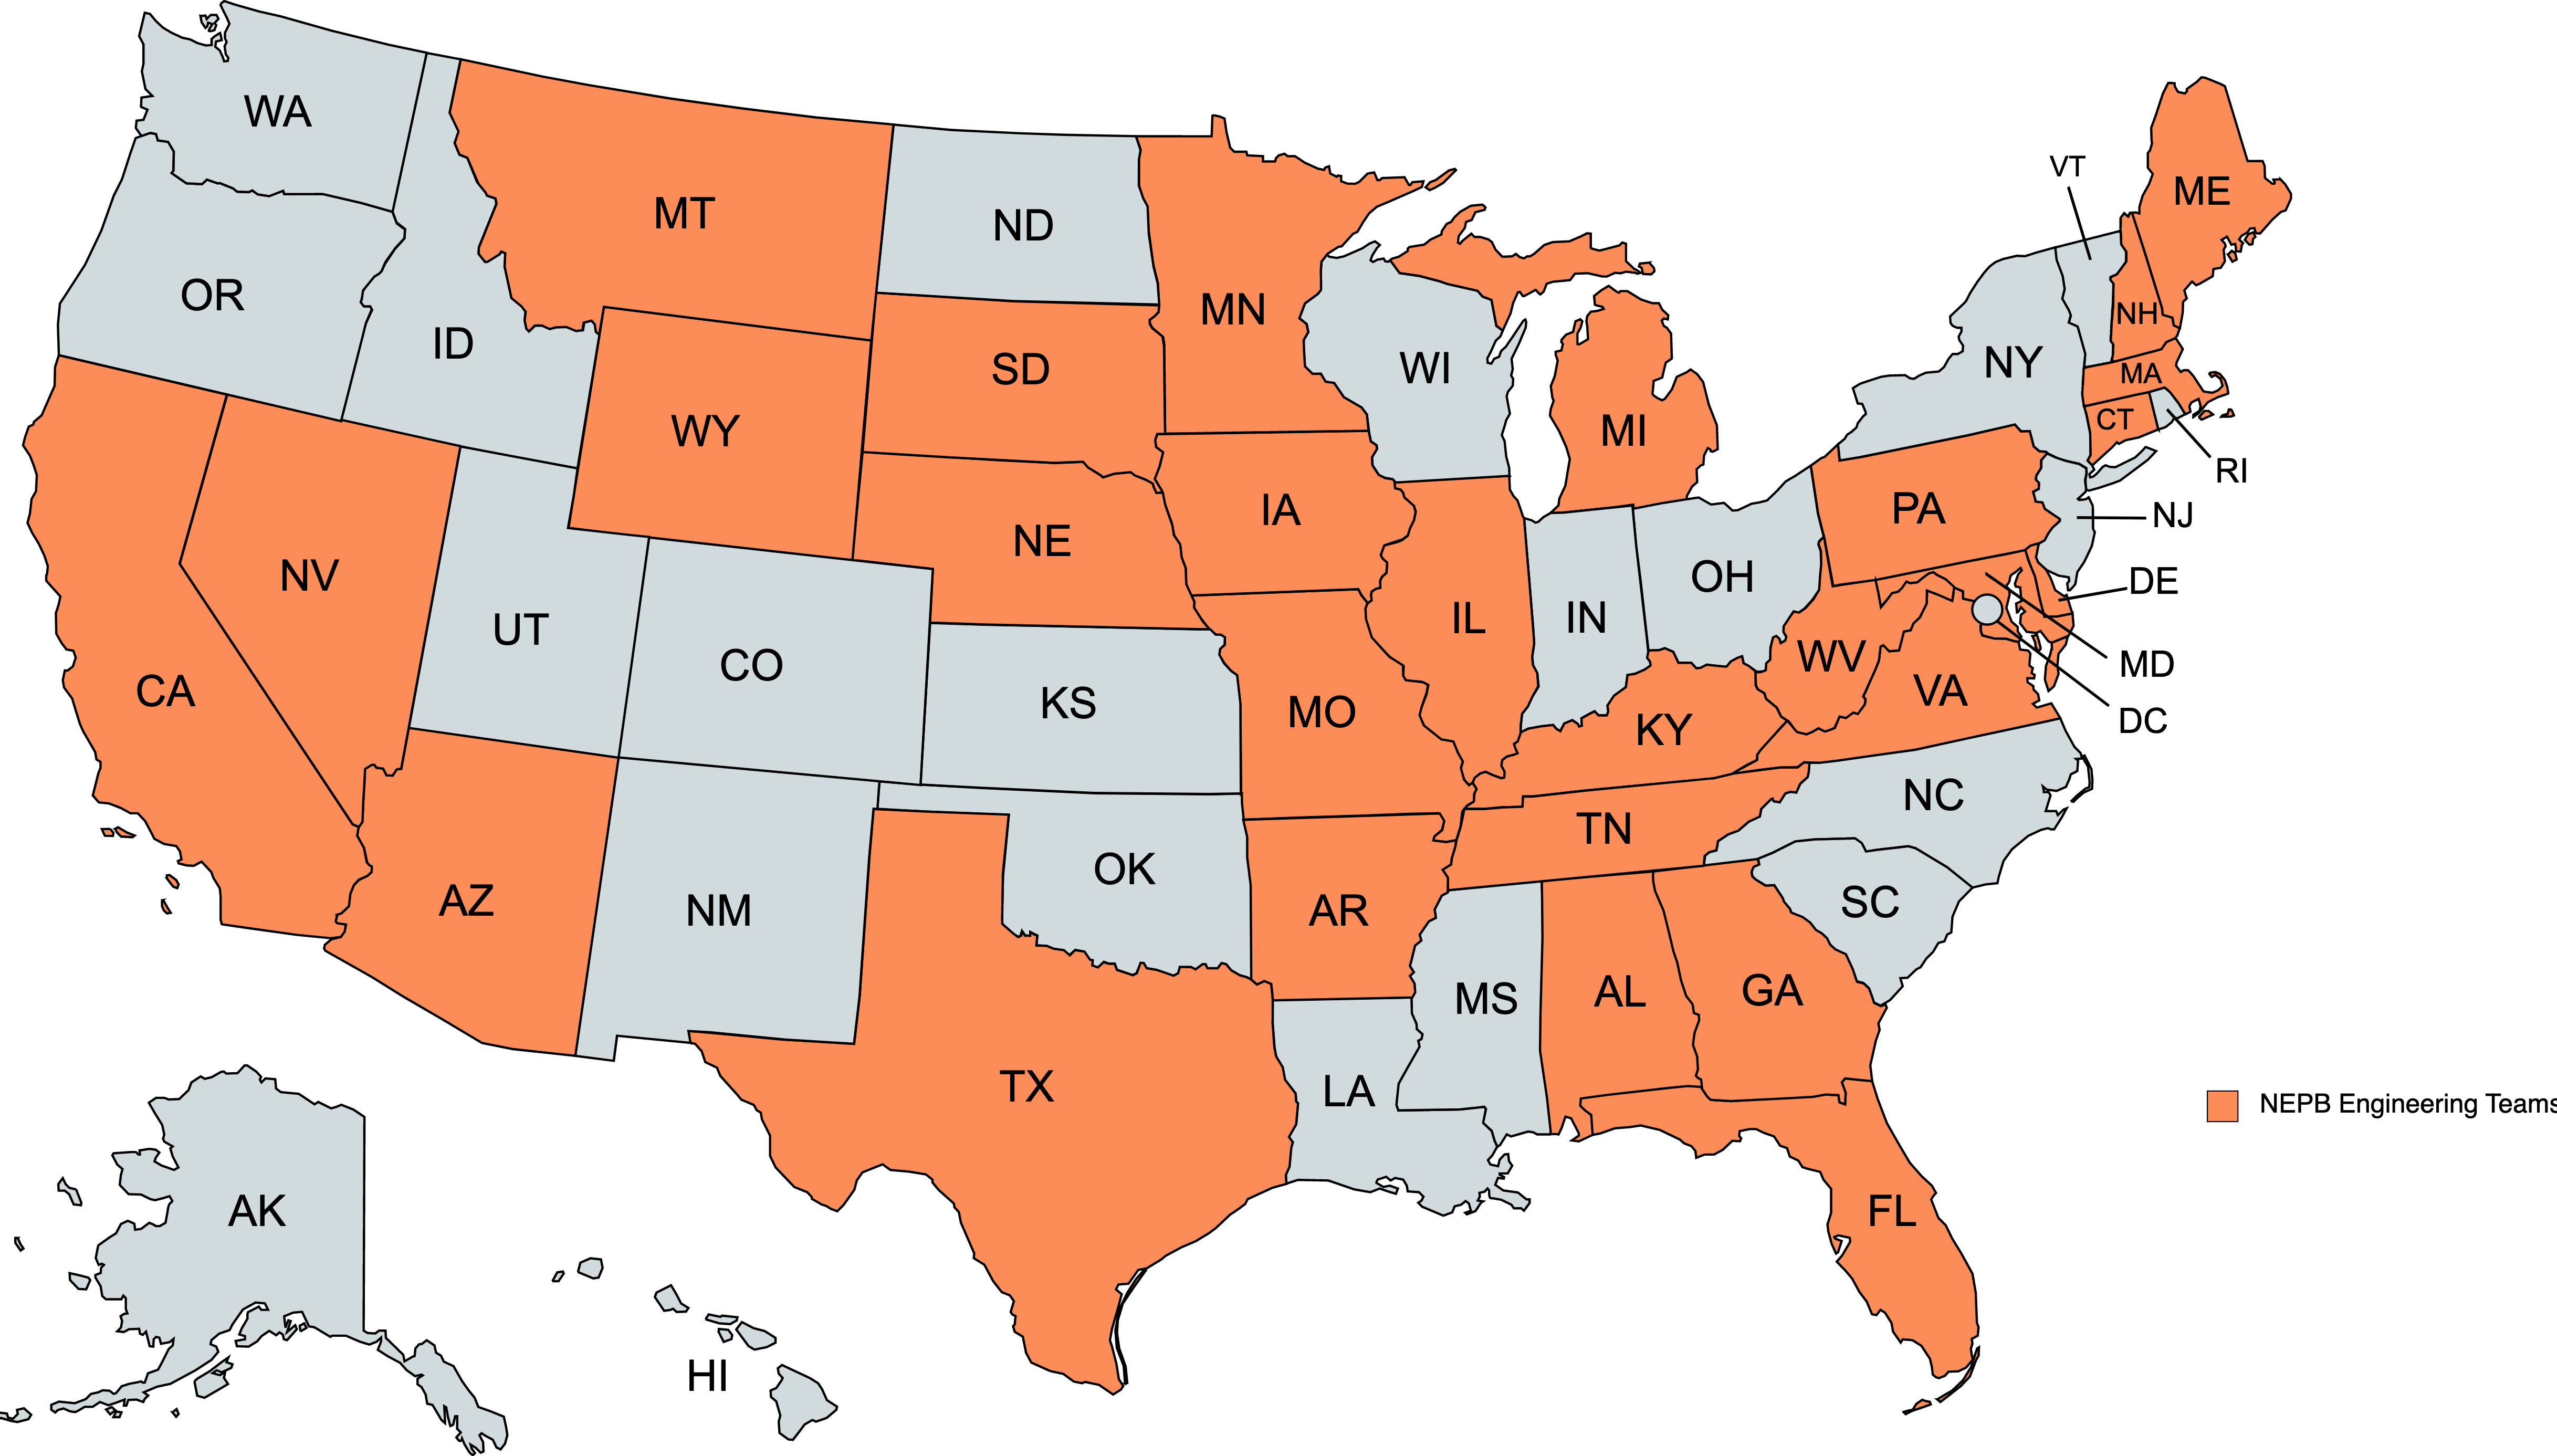 28 states are highlighted in orange, indicating which states have participating NEBP teams in the upcoming 2023 and 2024 eclipses.